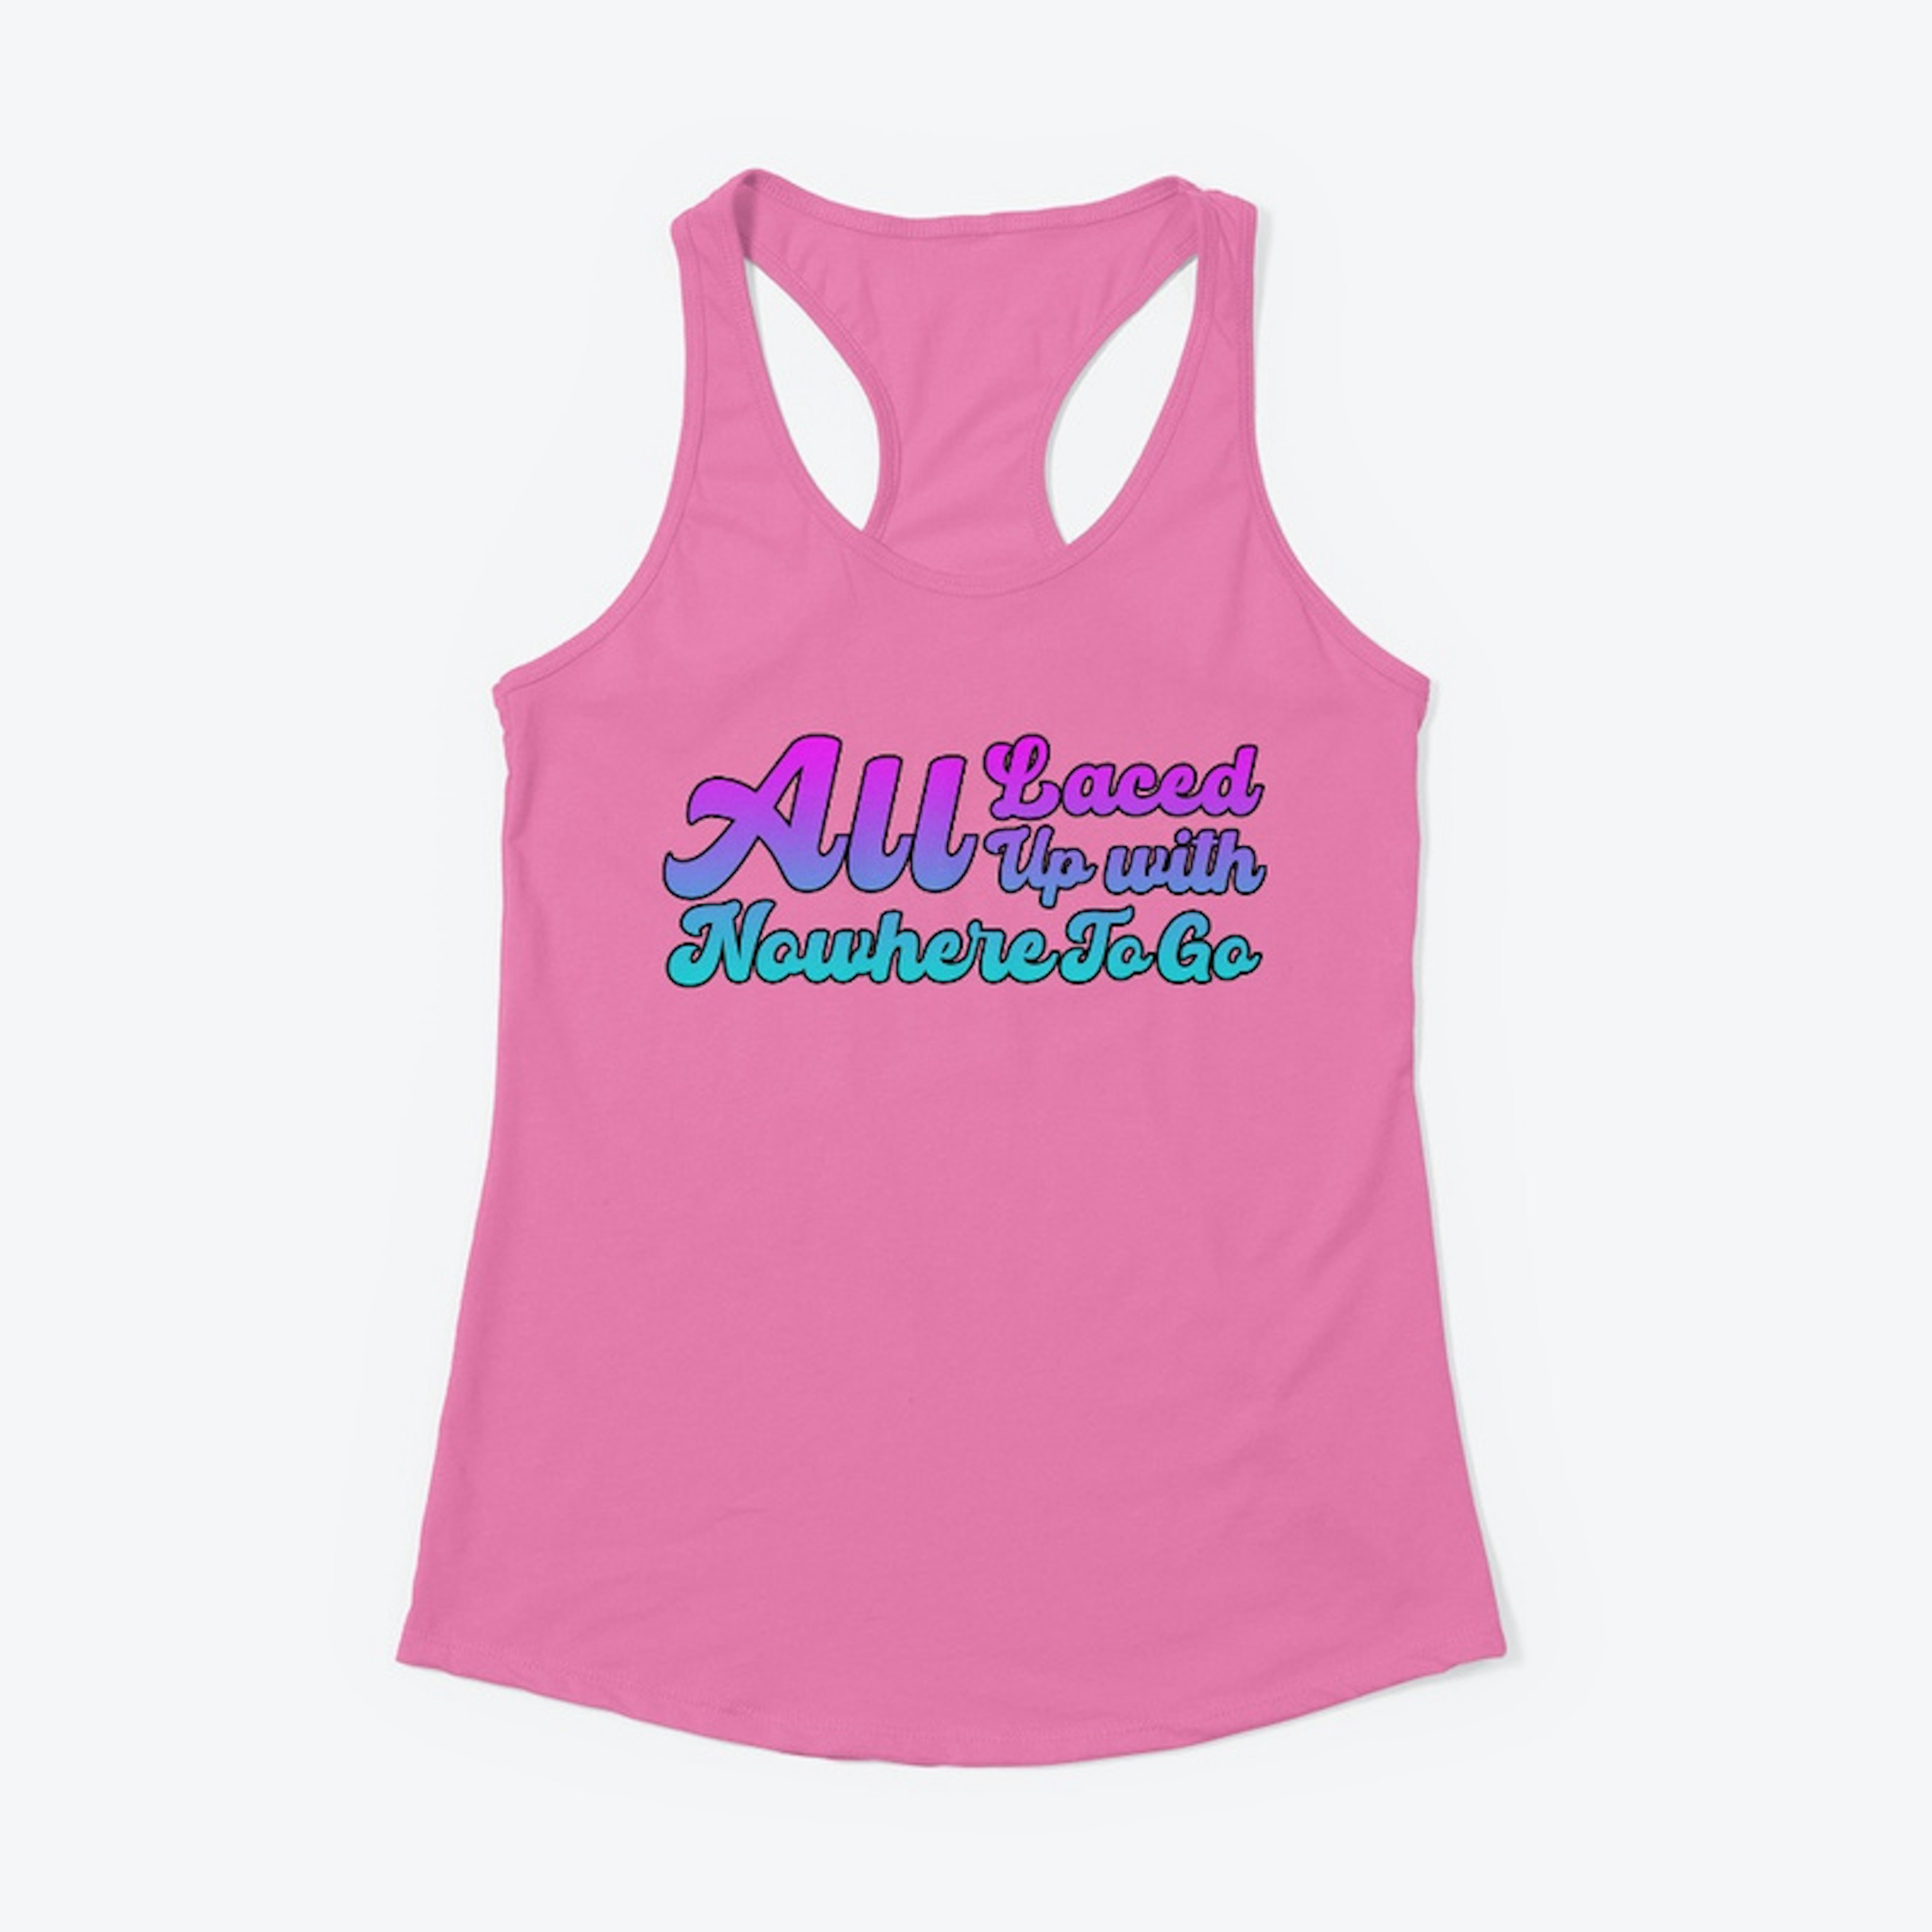 All Laced Up Women's Tank Top